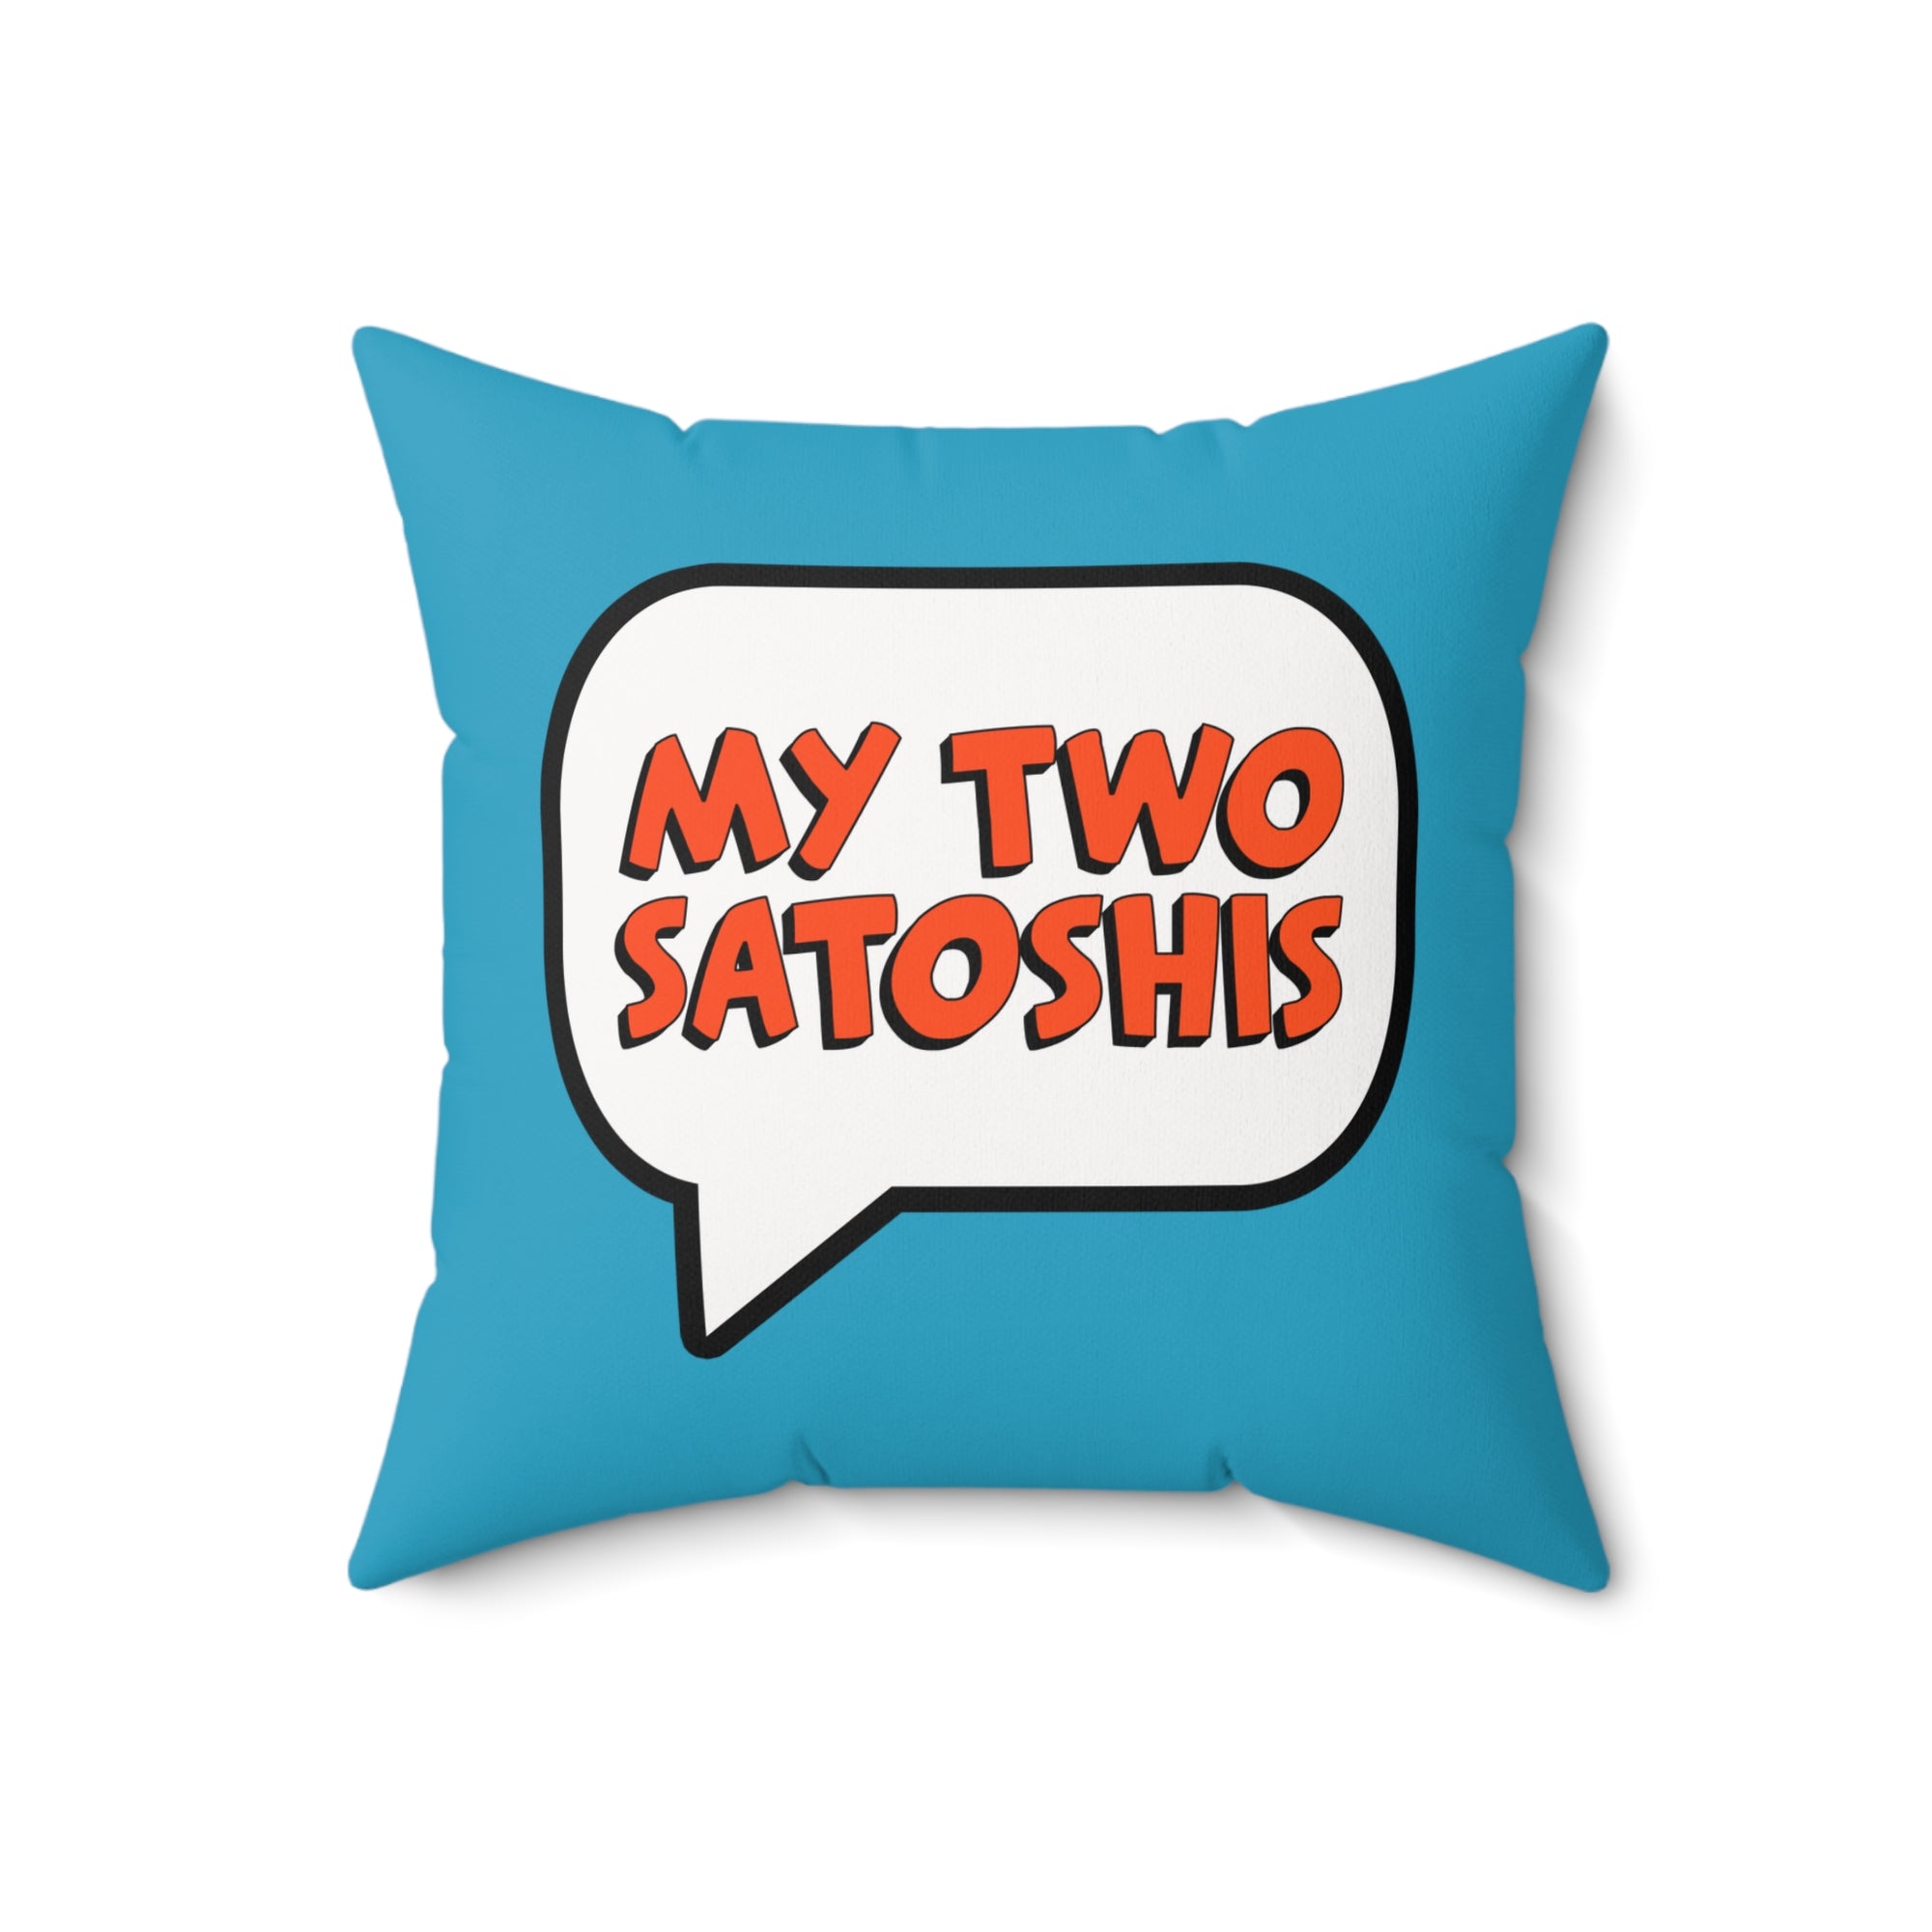 Bitcoin Merchandise - My Two Satoshis Pillow. Close Up View.